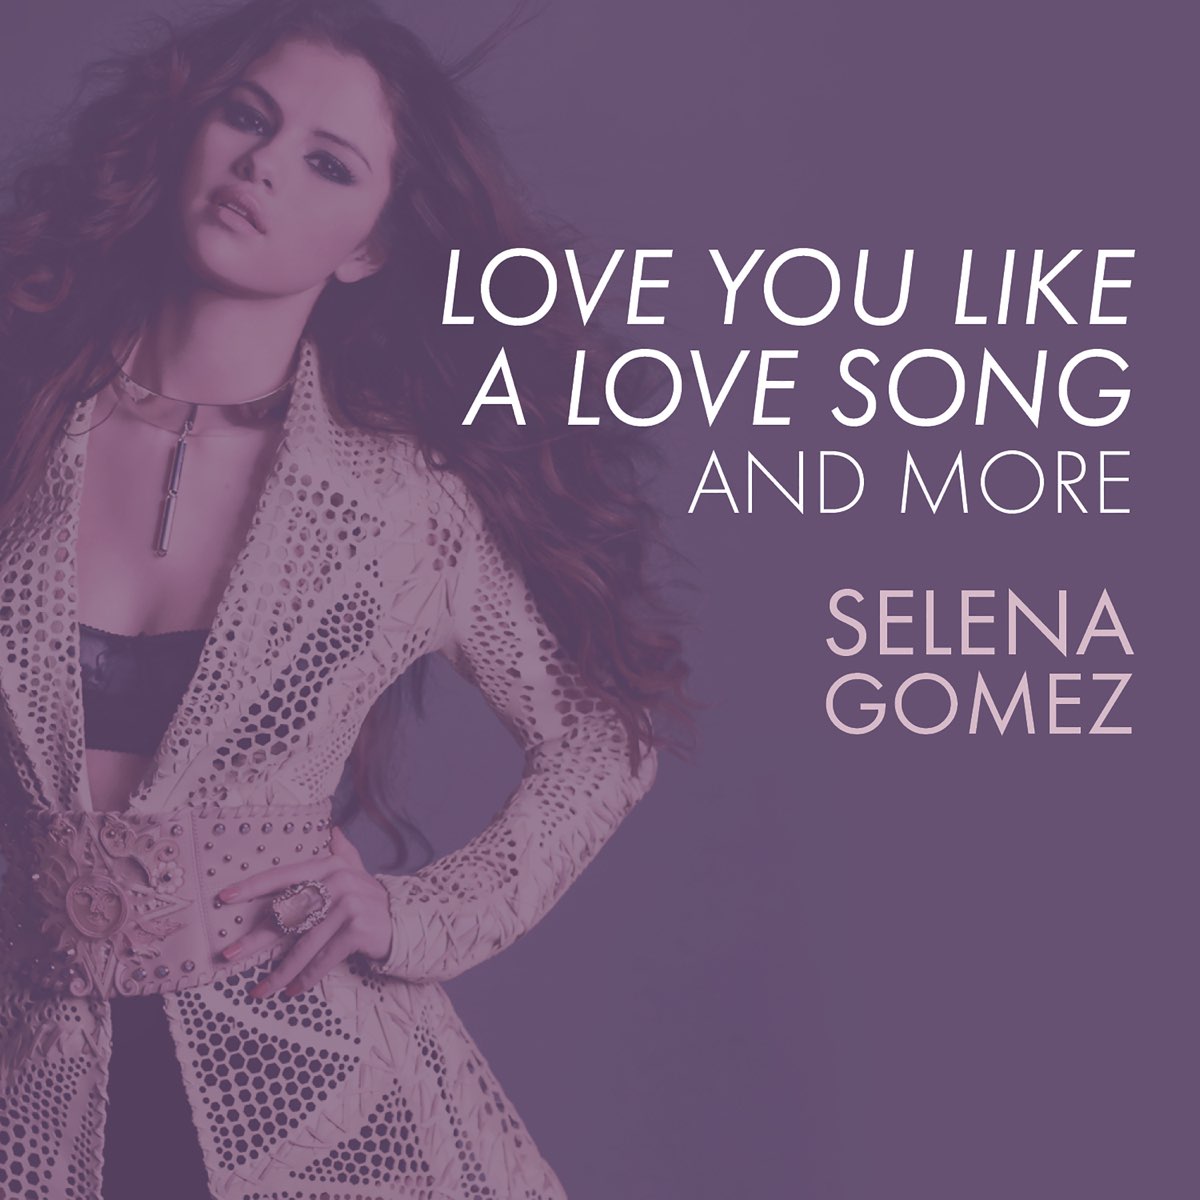 Love You Like A Love Song, Come & Get It, and More by Selena Gomez & Selena  Gomez & The Scene on Apple Music